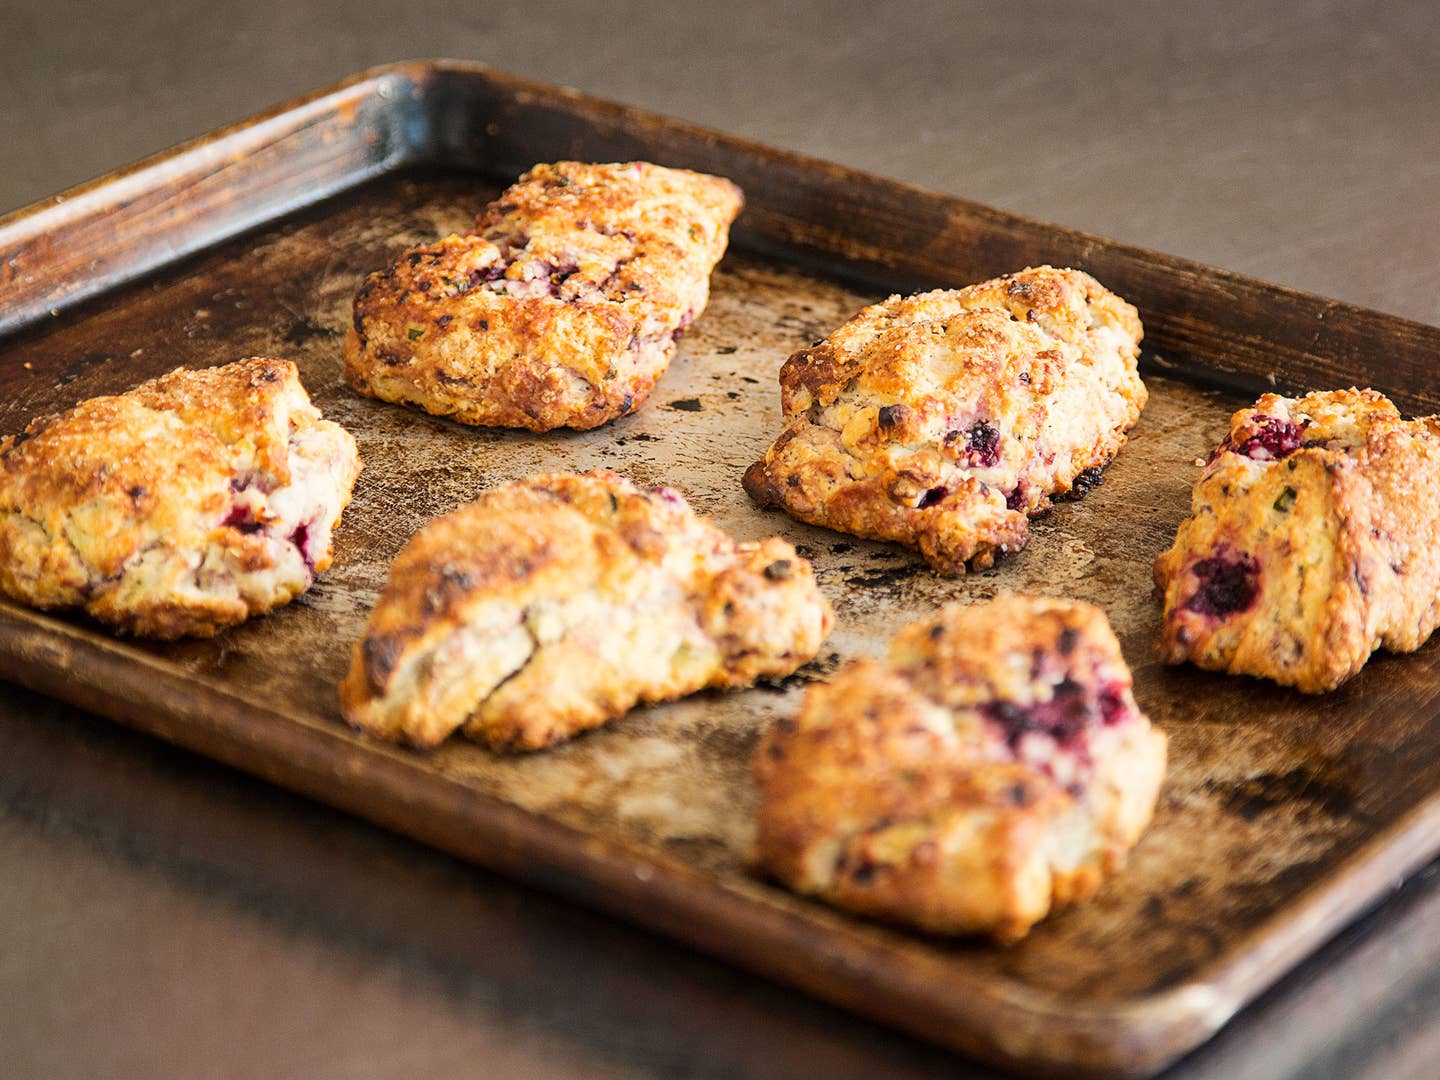 Video: How to Make Blackberry-Mint Scones